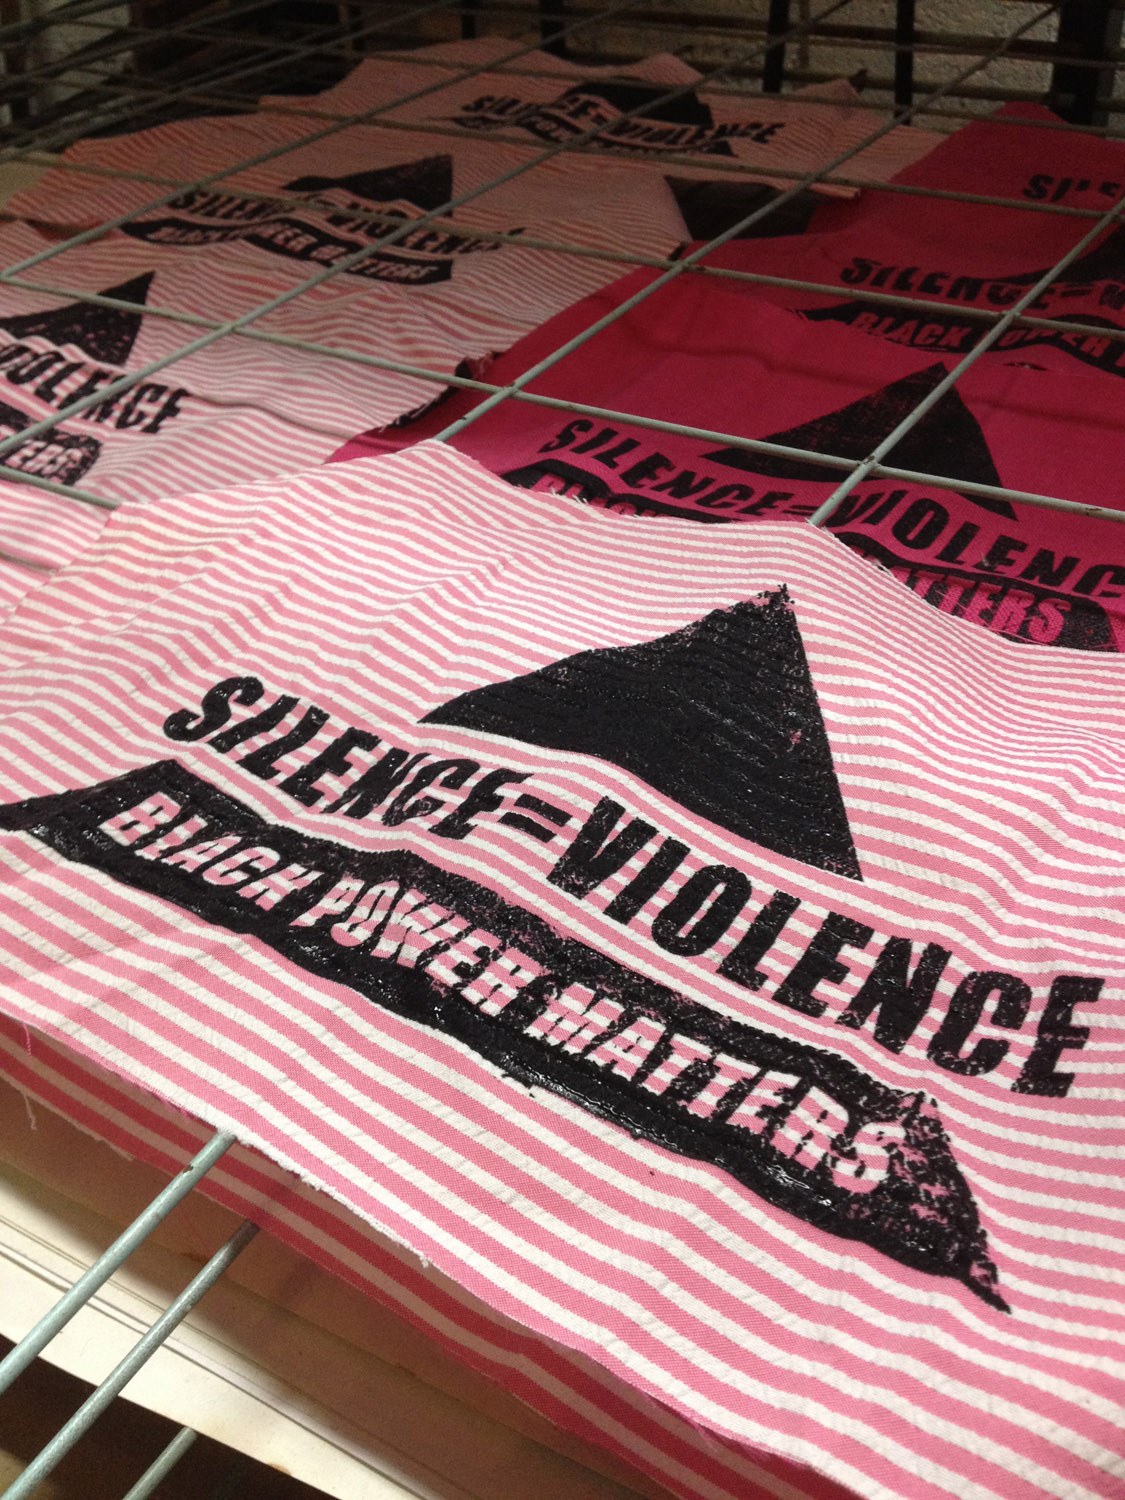 silence is violence patches.jpg